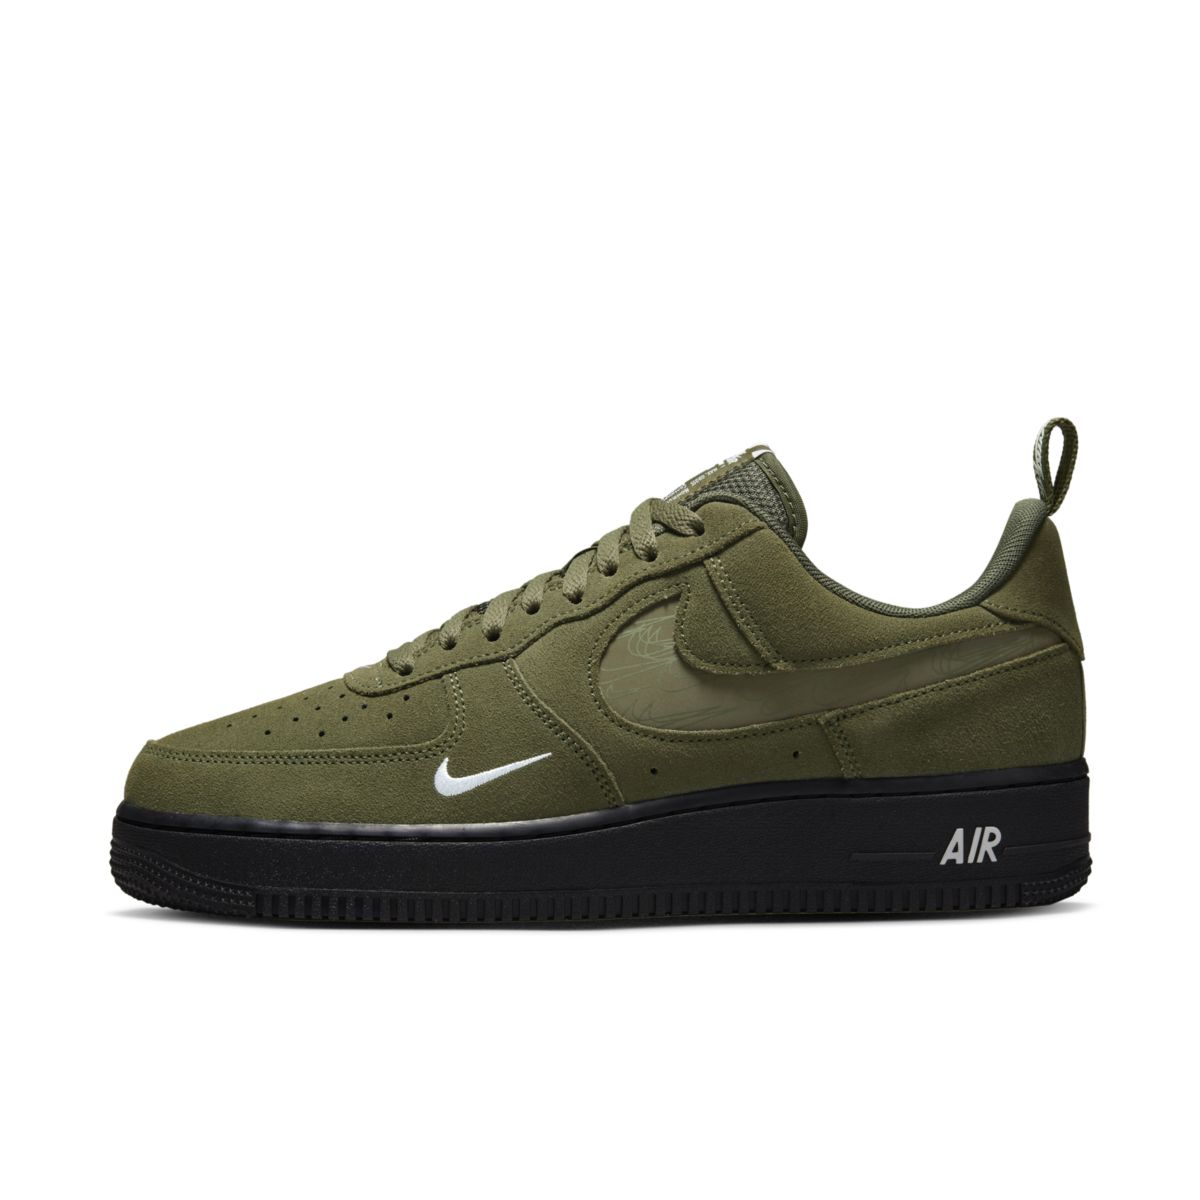 Nike Air Force 1 Low Olive Suede DZ4514-300 2